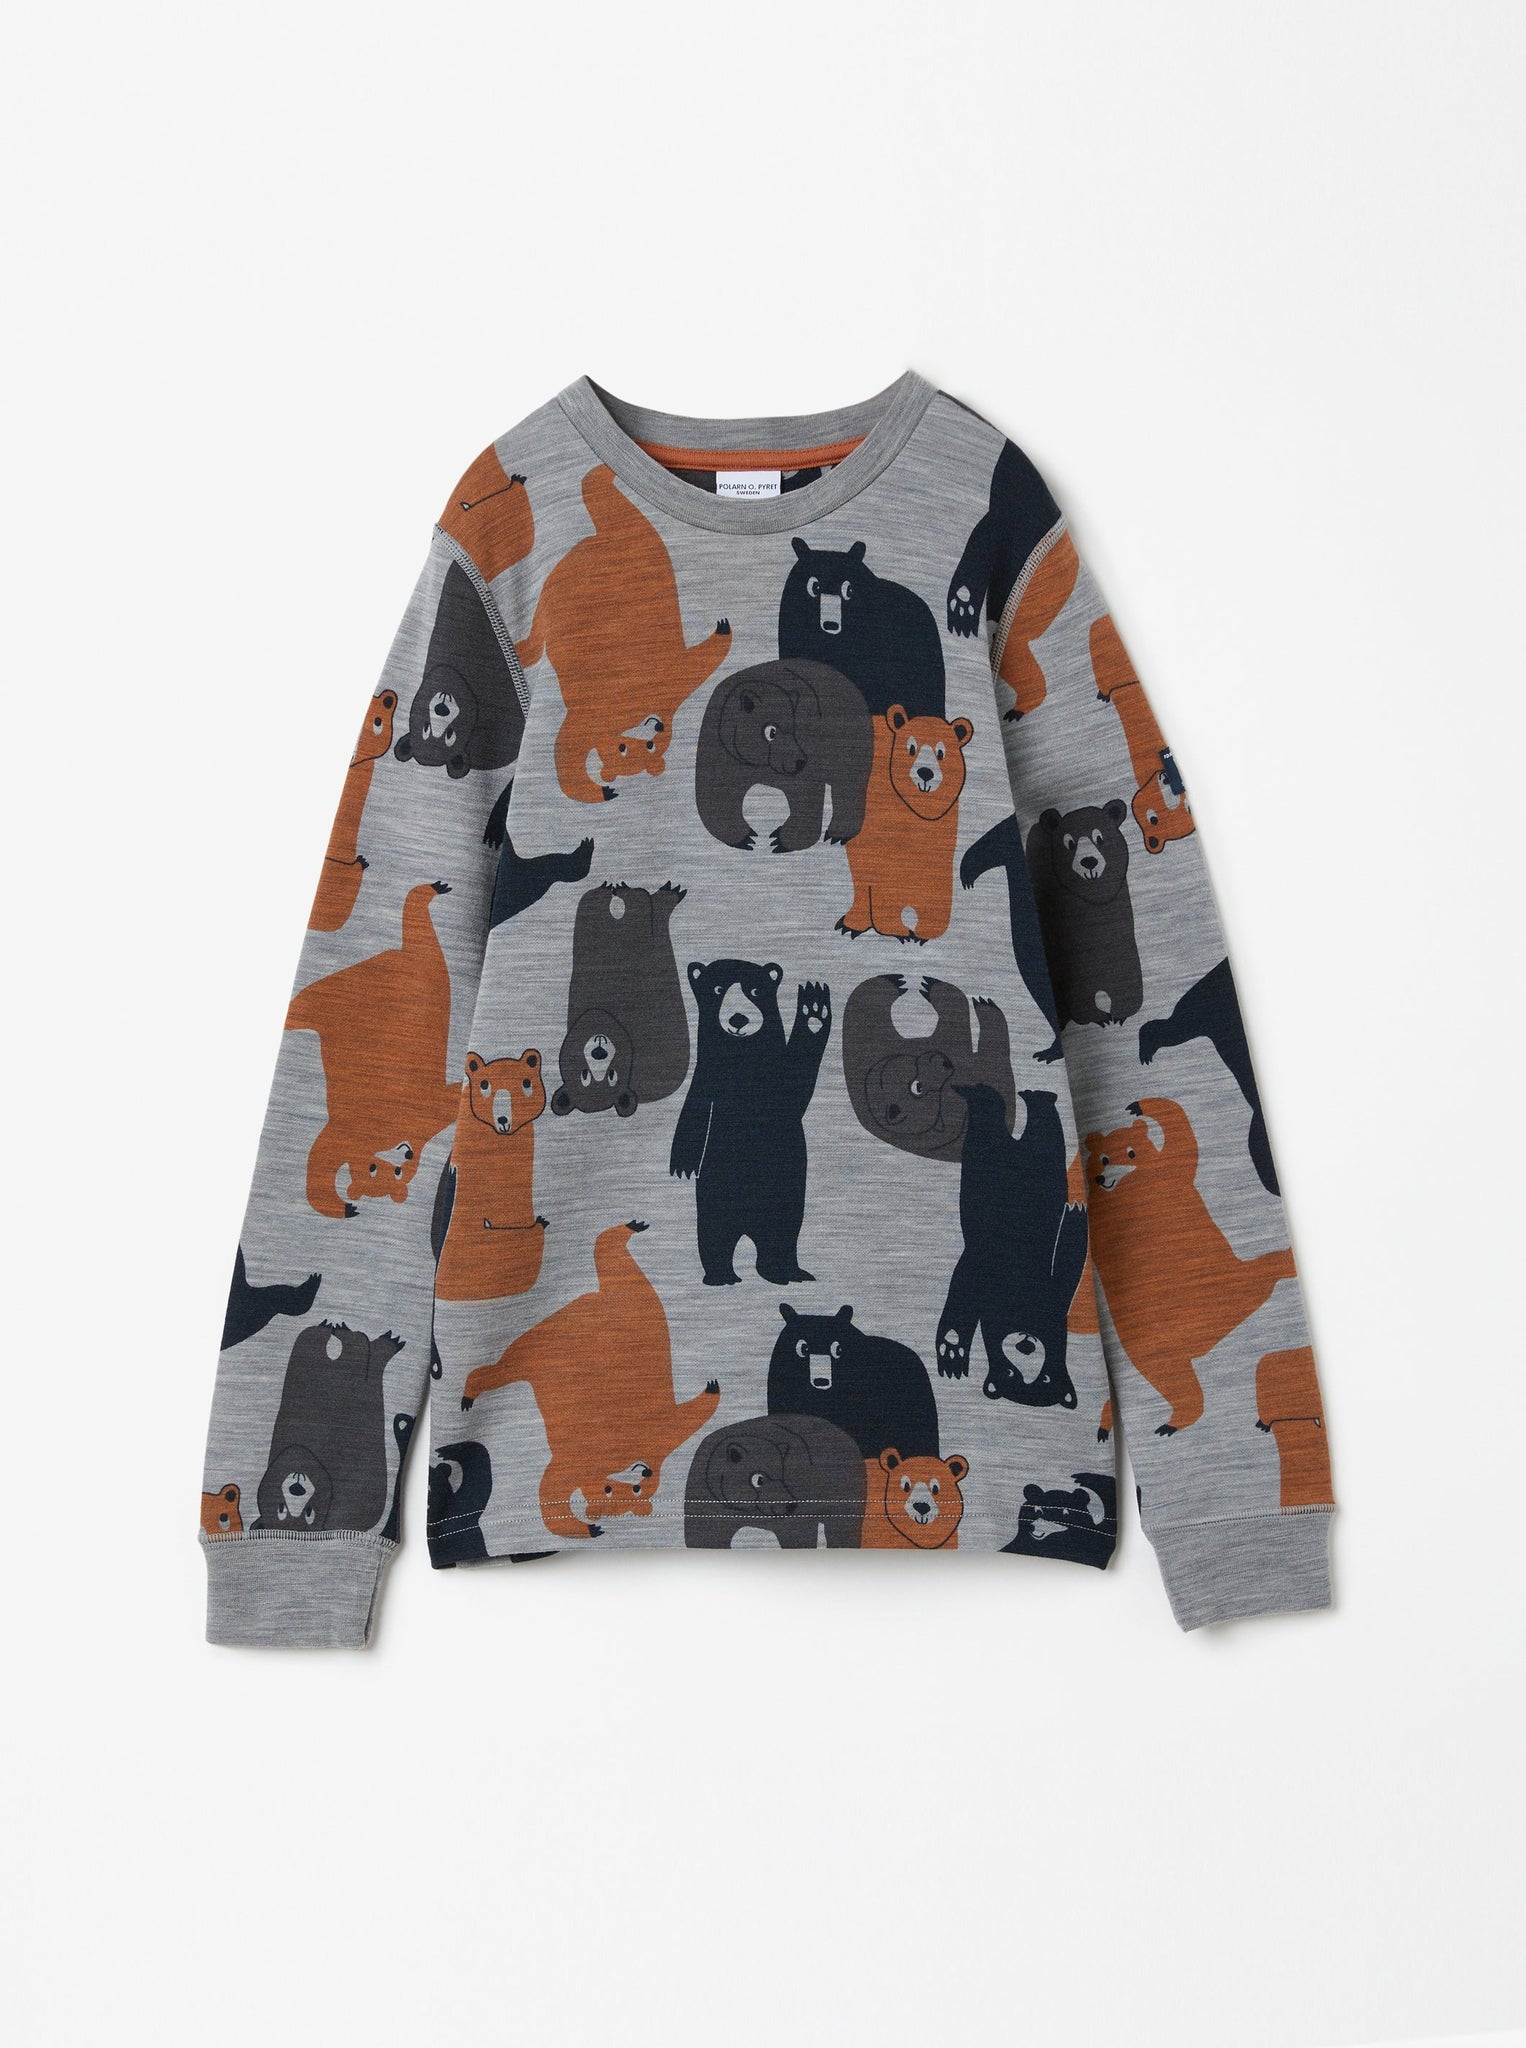 Bear Print Merino Kids Top from the Polarn O. Pyret kidswear collection. Ethically produced kids clothing.